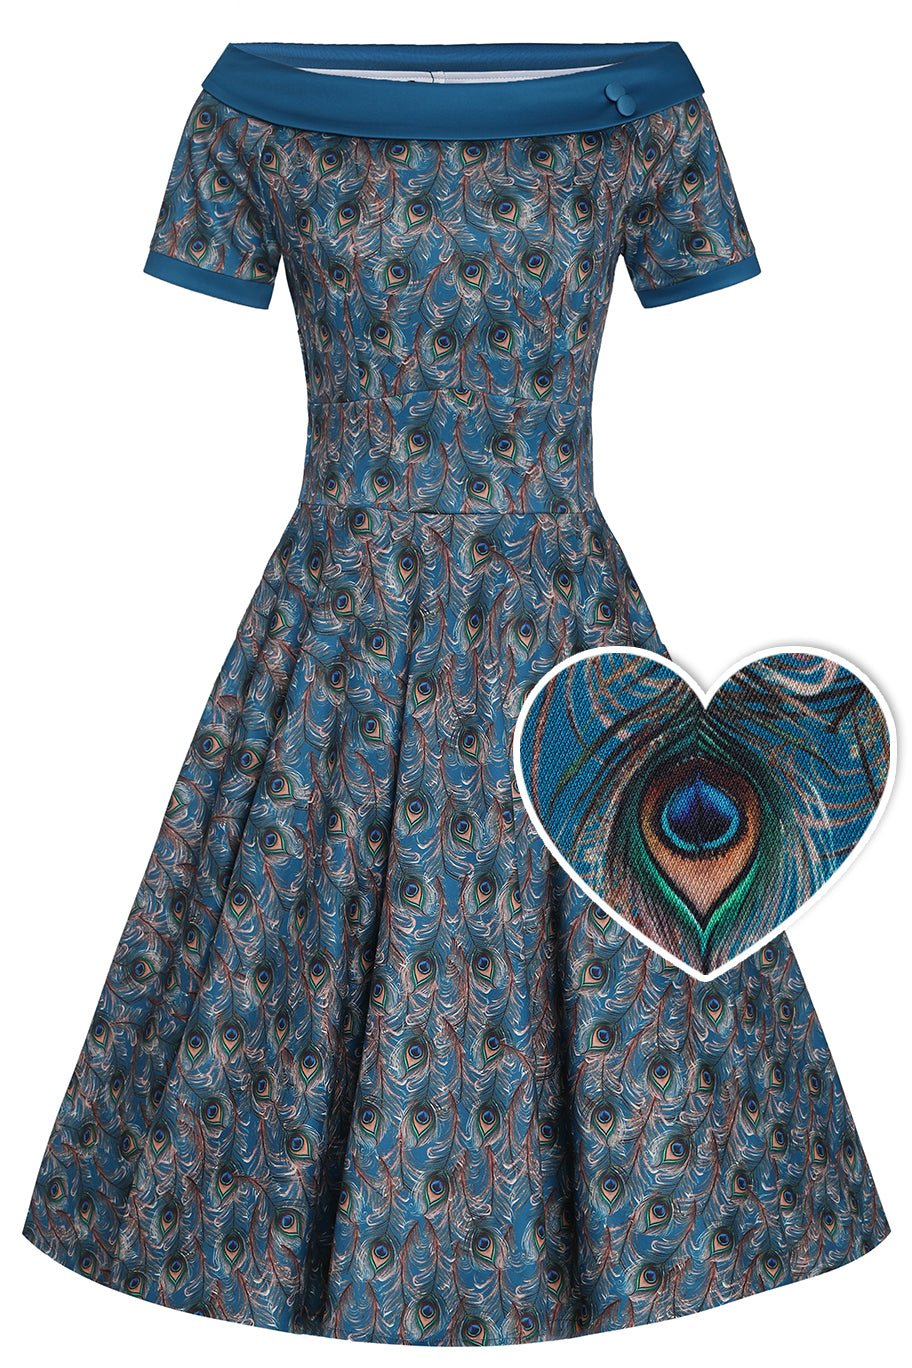 Peacock Feather Swing Dress